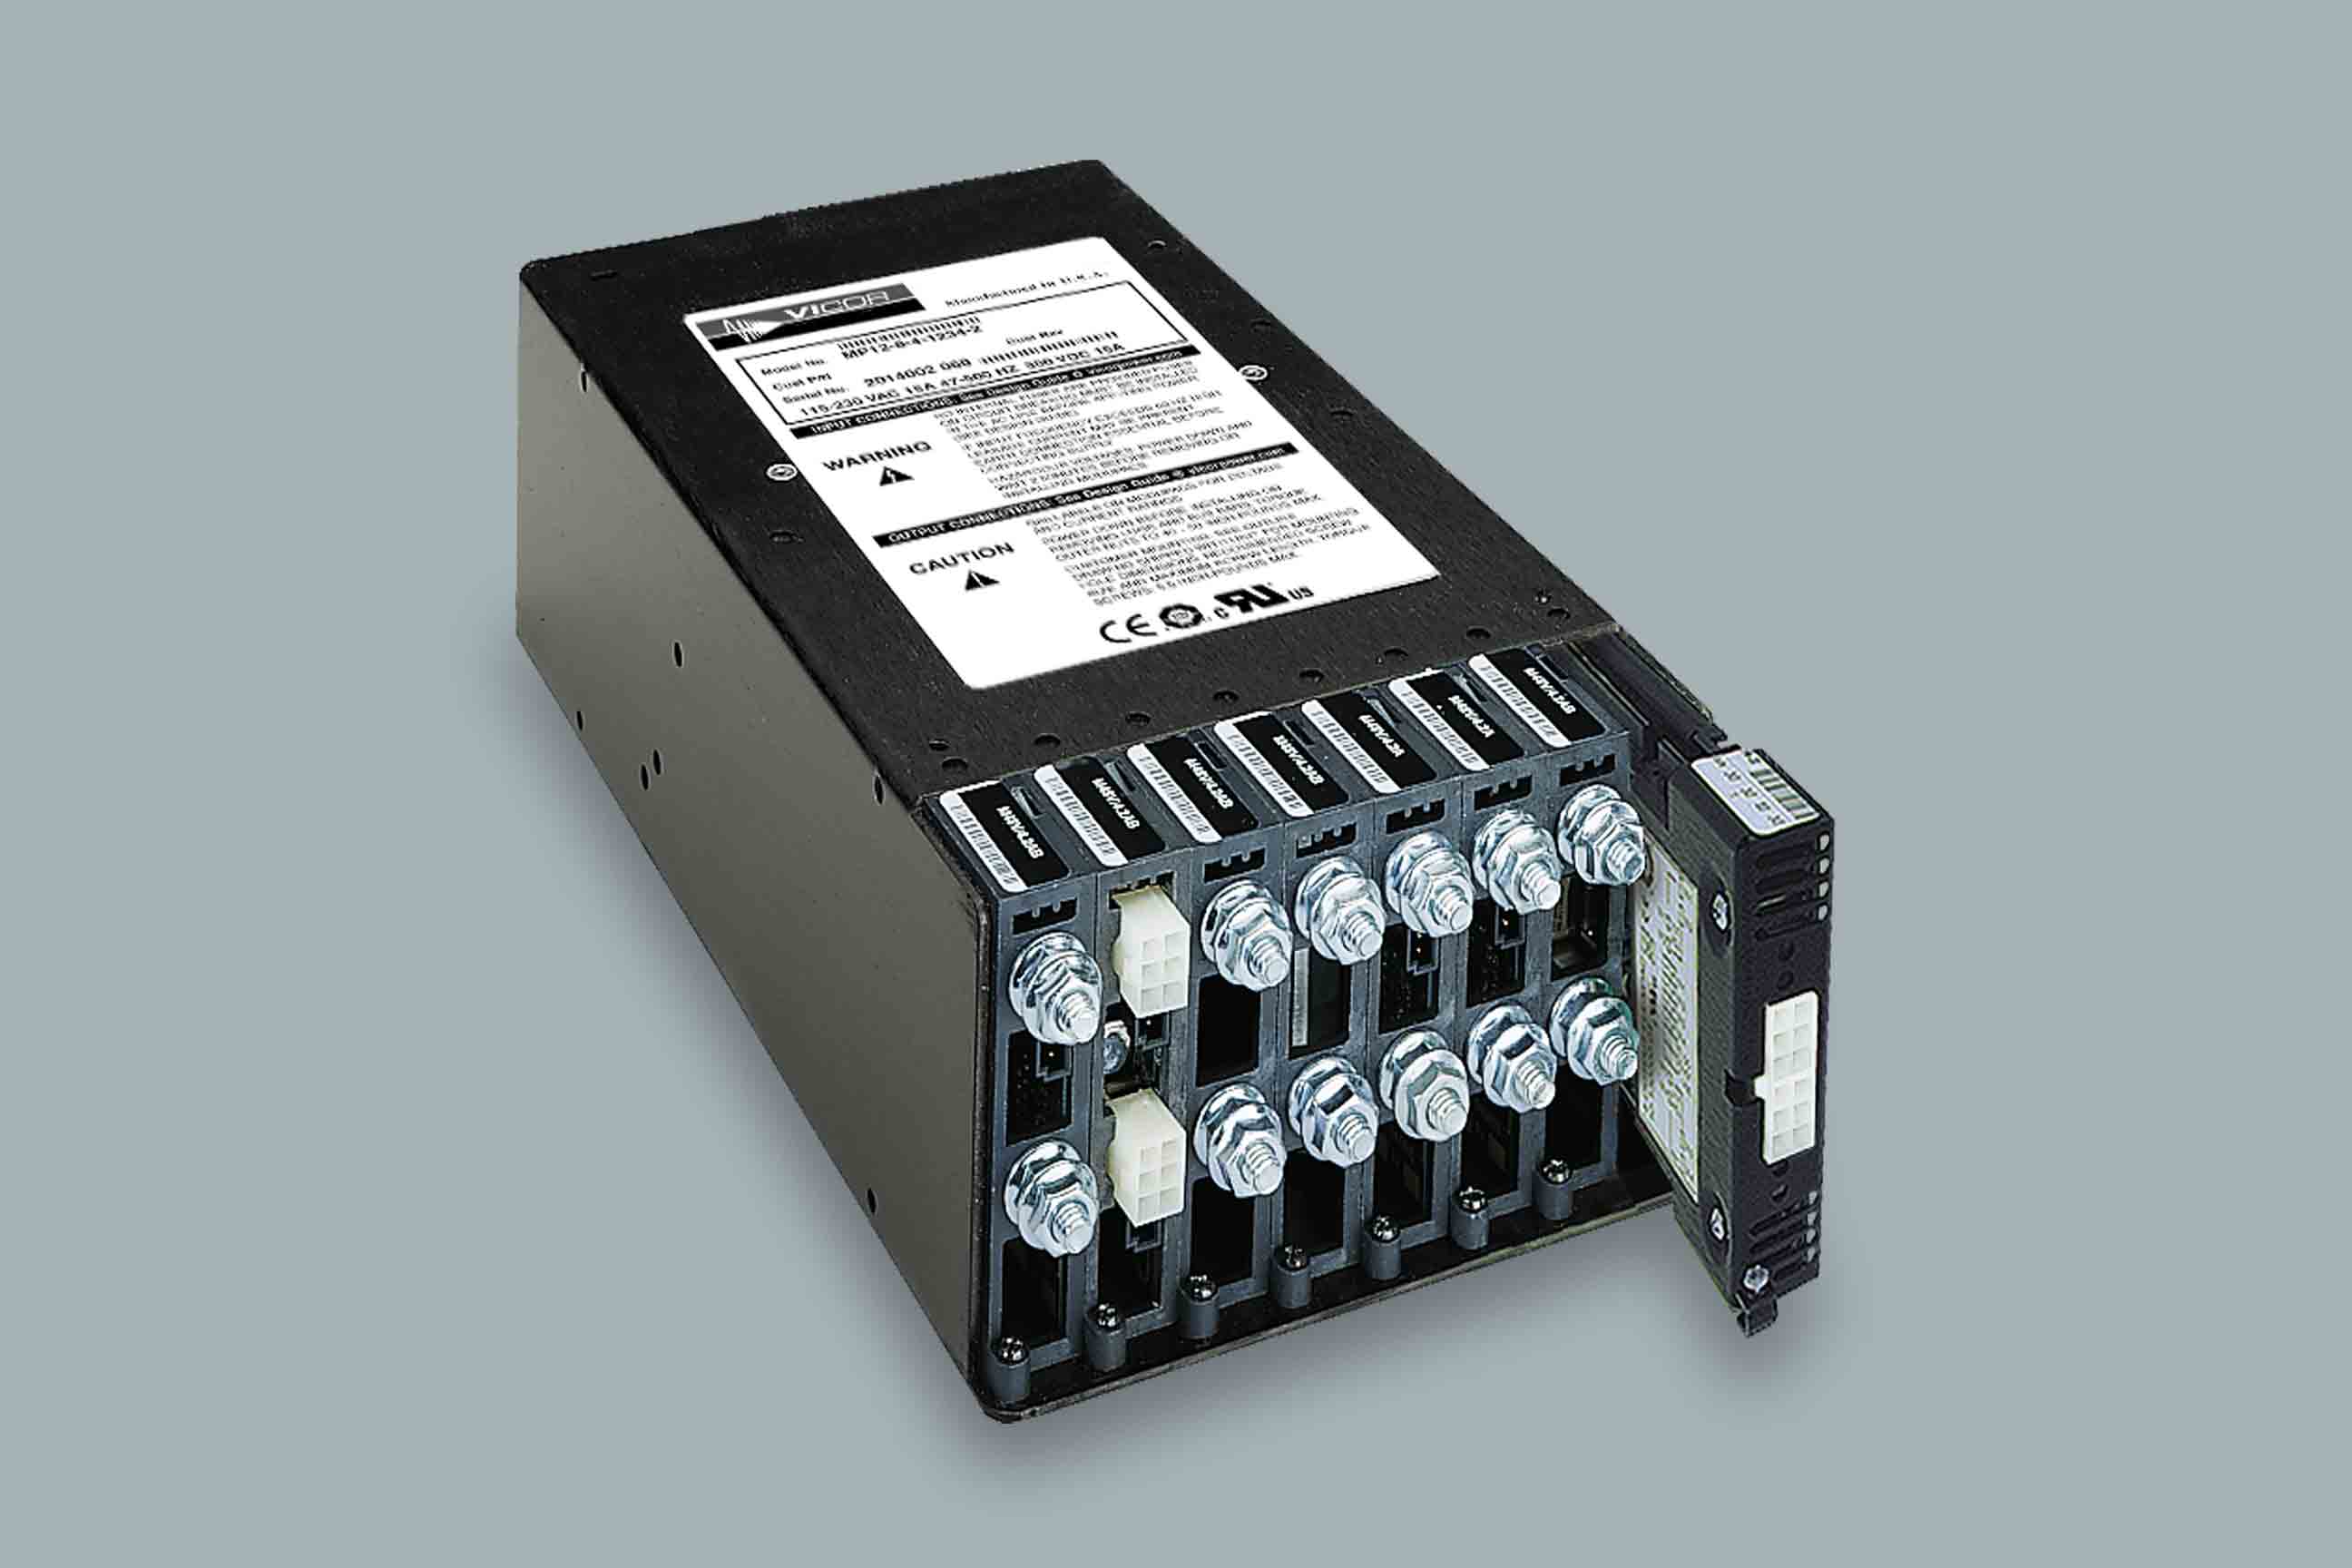 PFC MegaPAC MI Mil Cot Power Supplies for Military Applications| Vicor